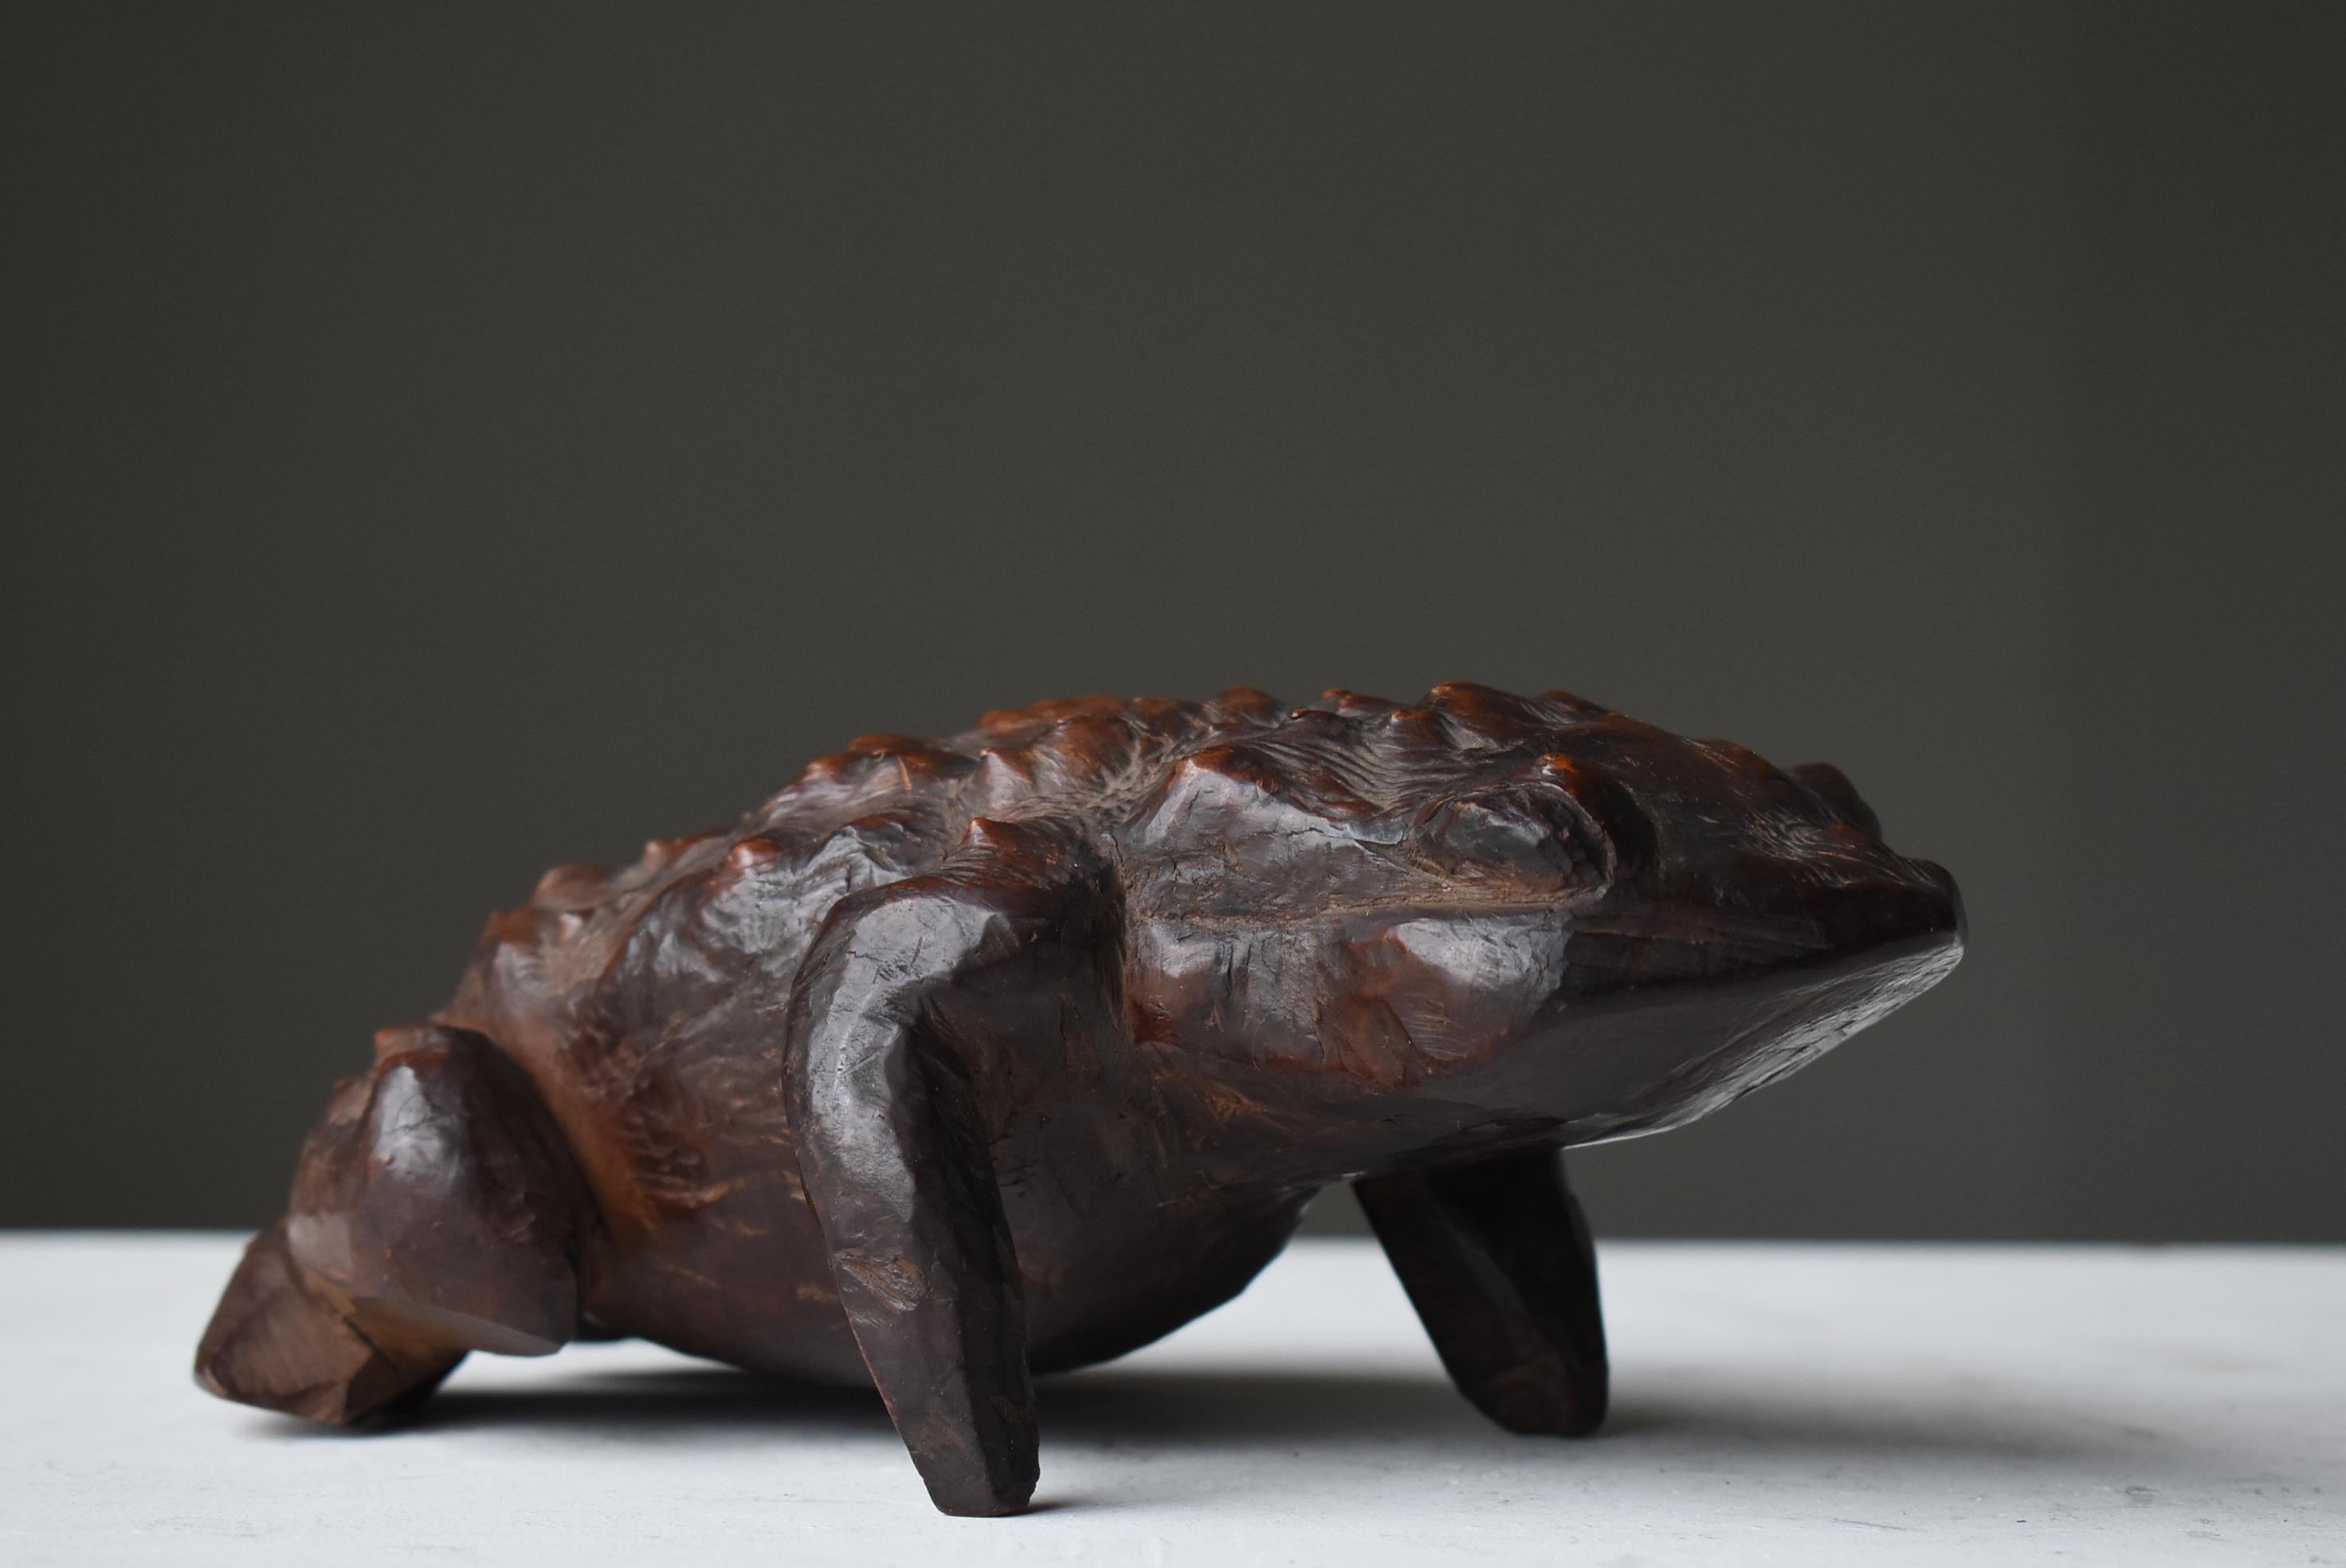 Japanese Antique Wood Carving Frog 1900s-1940s / Sculpture Wabi Sabi  In Good Condition For Sale In Sammu-shi, Chiba